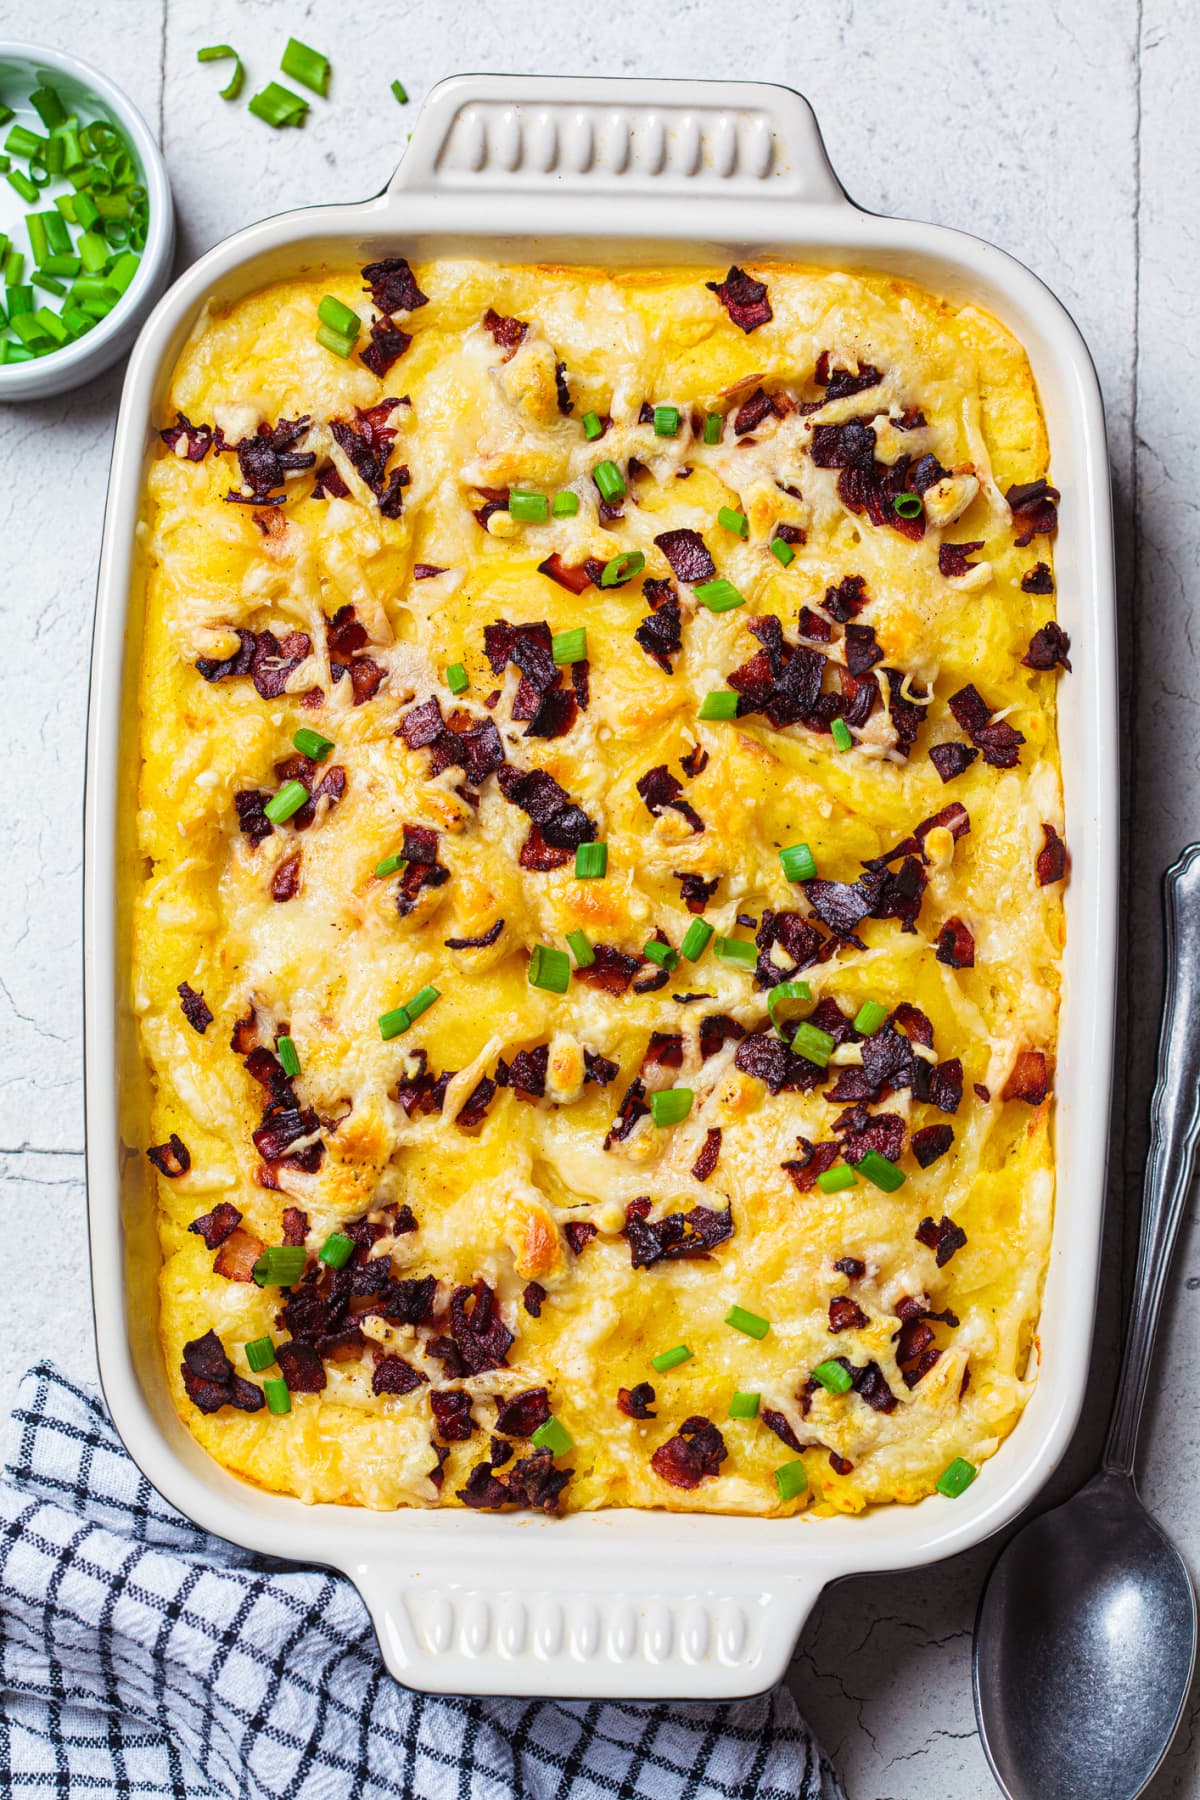 Baked mashed potatoes with bacon and green onions, top view. Festive Christmas or Thanksgiving Day dish.